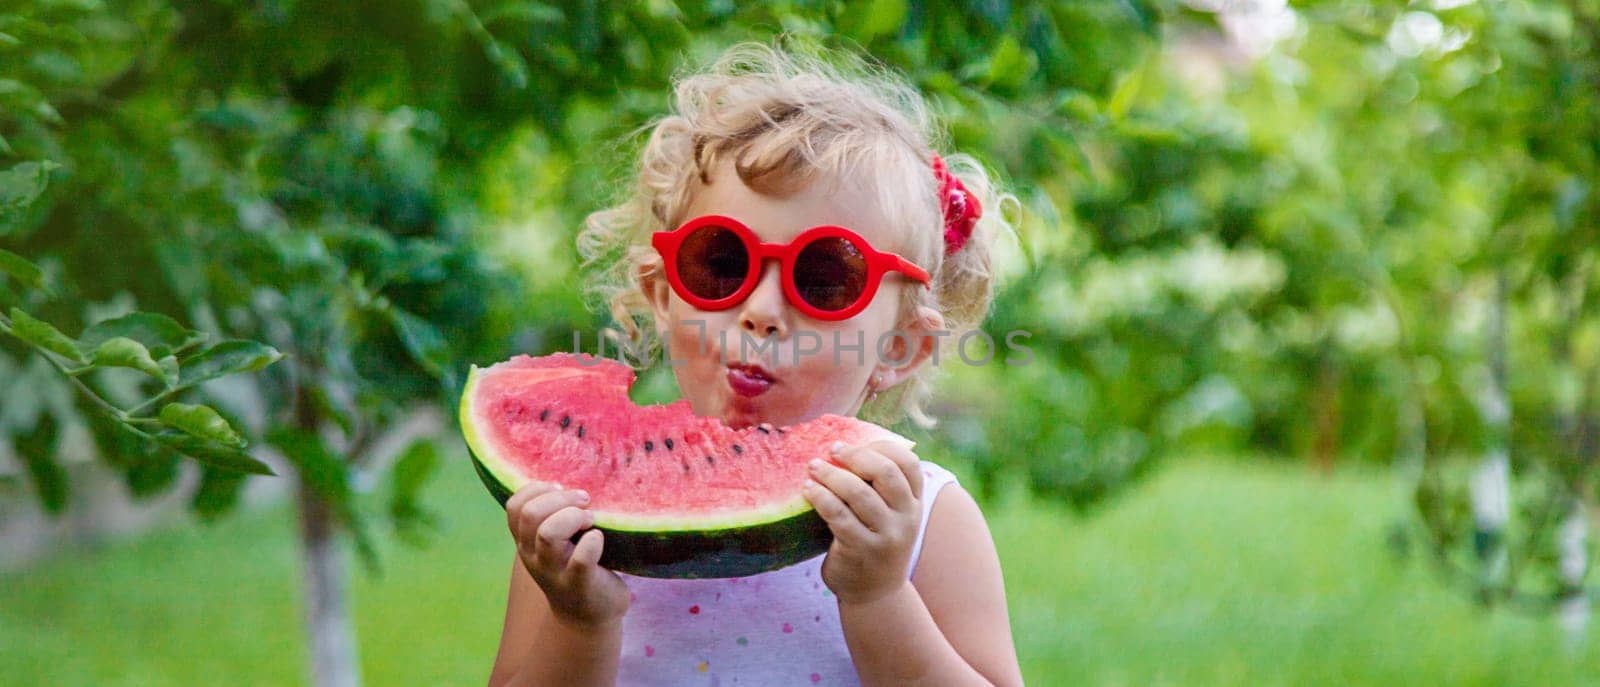 A child eats a watermelon in the park. Selective focus. by yanadjana